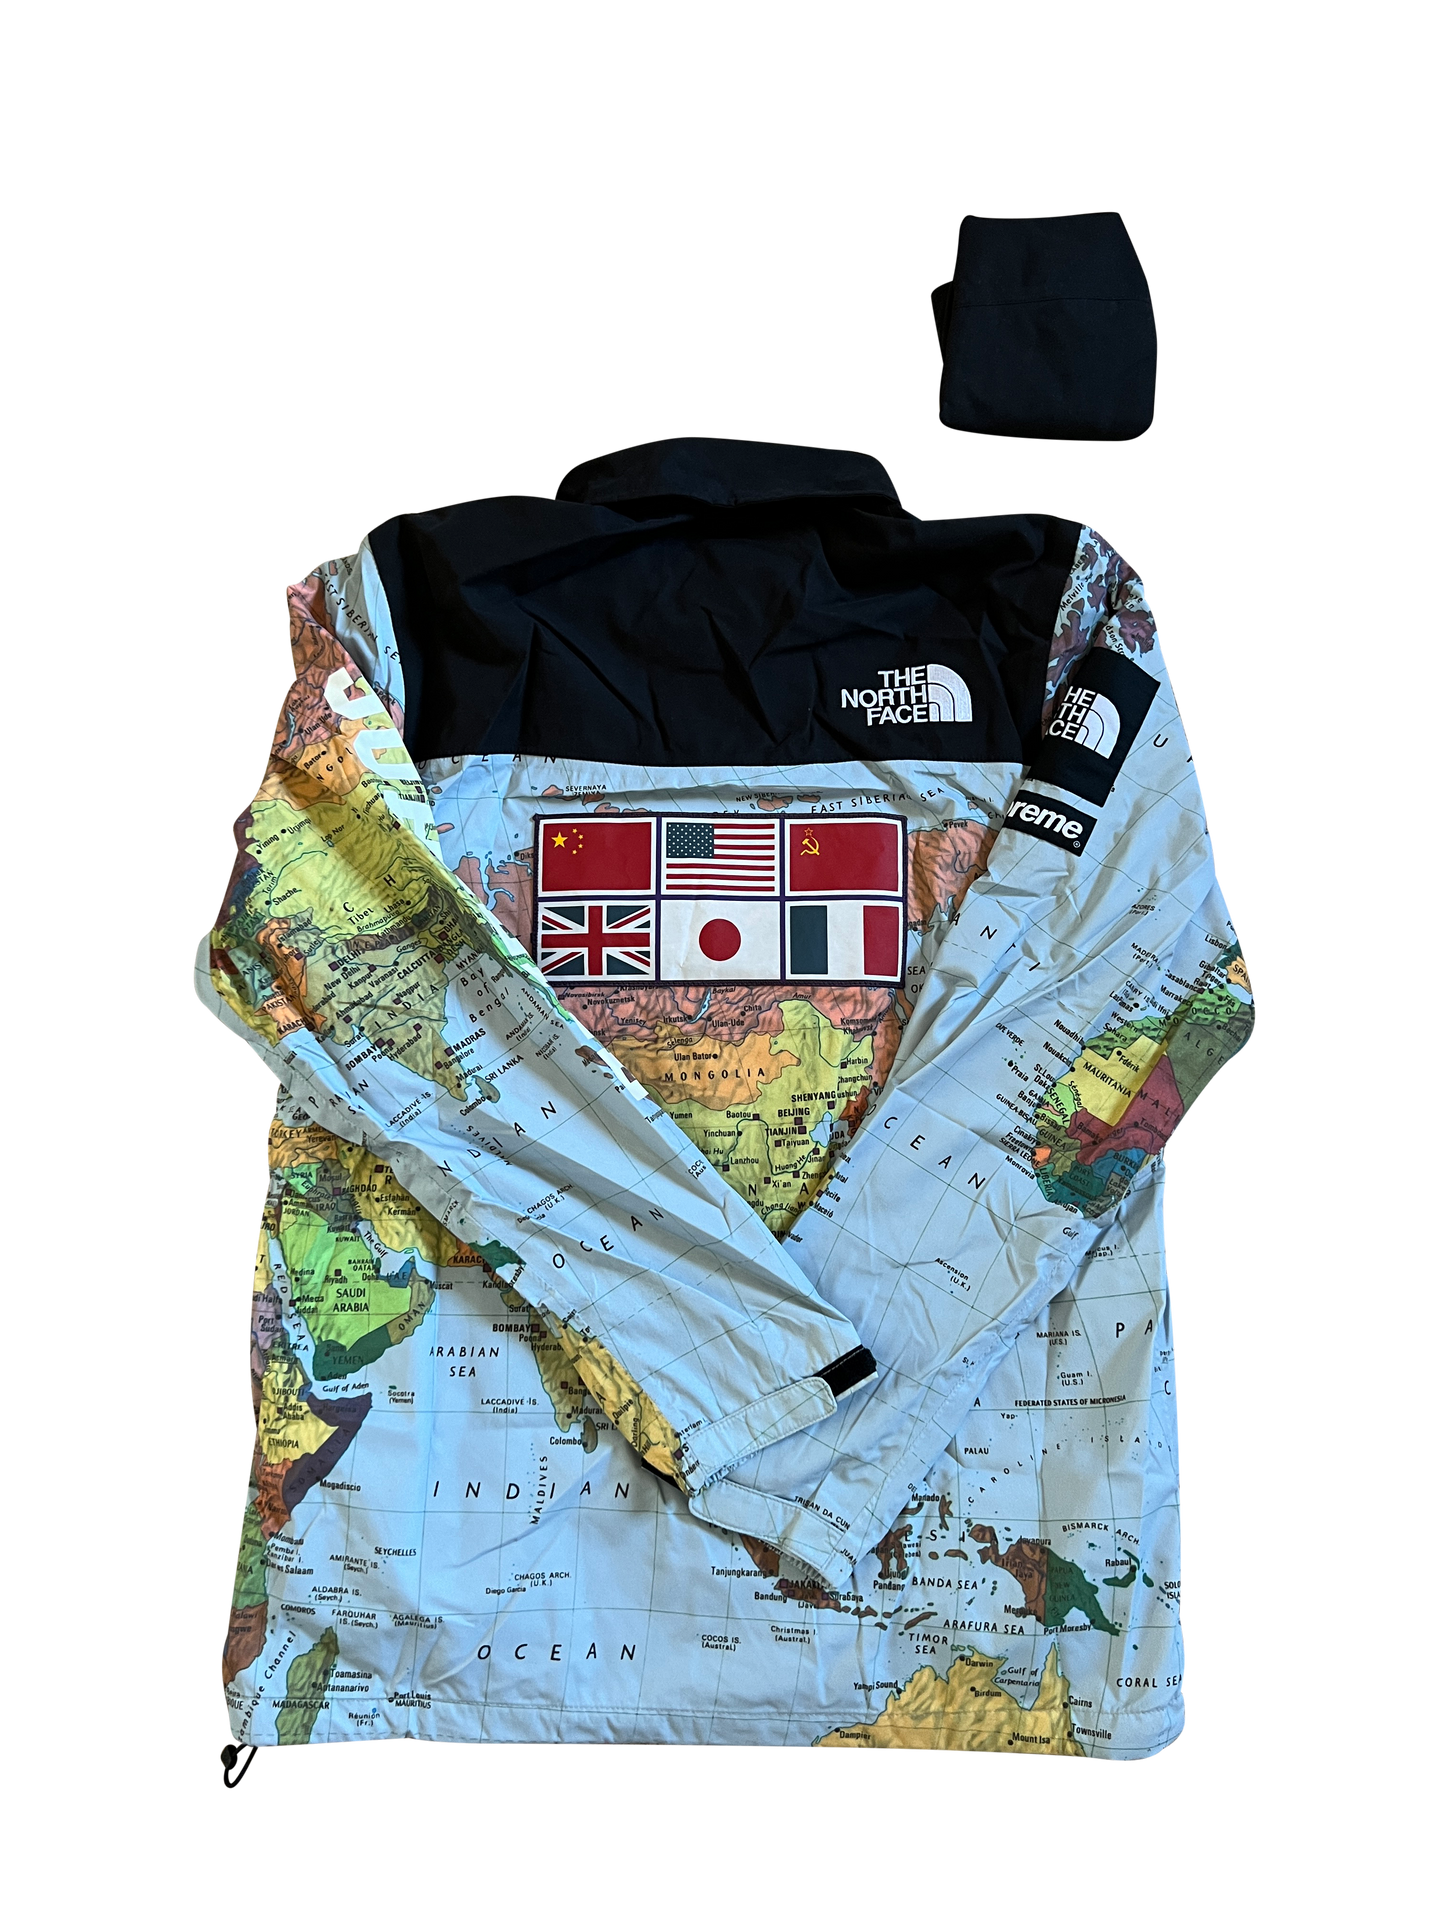 2014 Supreme X The North Face Maps Expedition Jacket